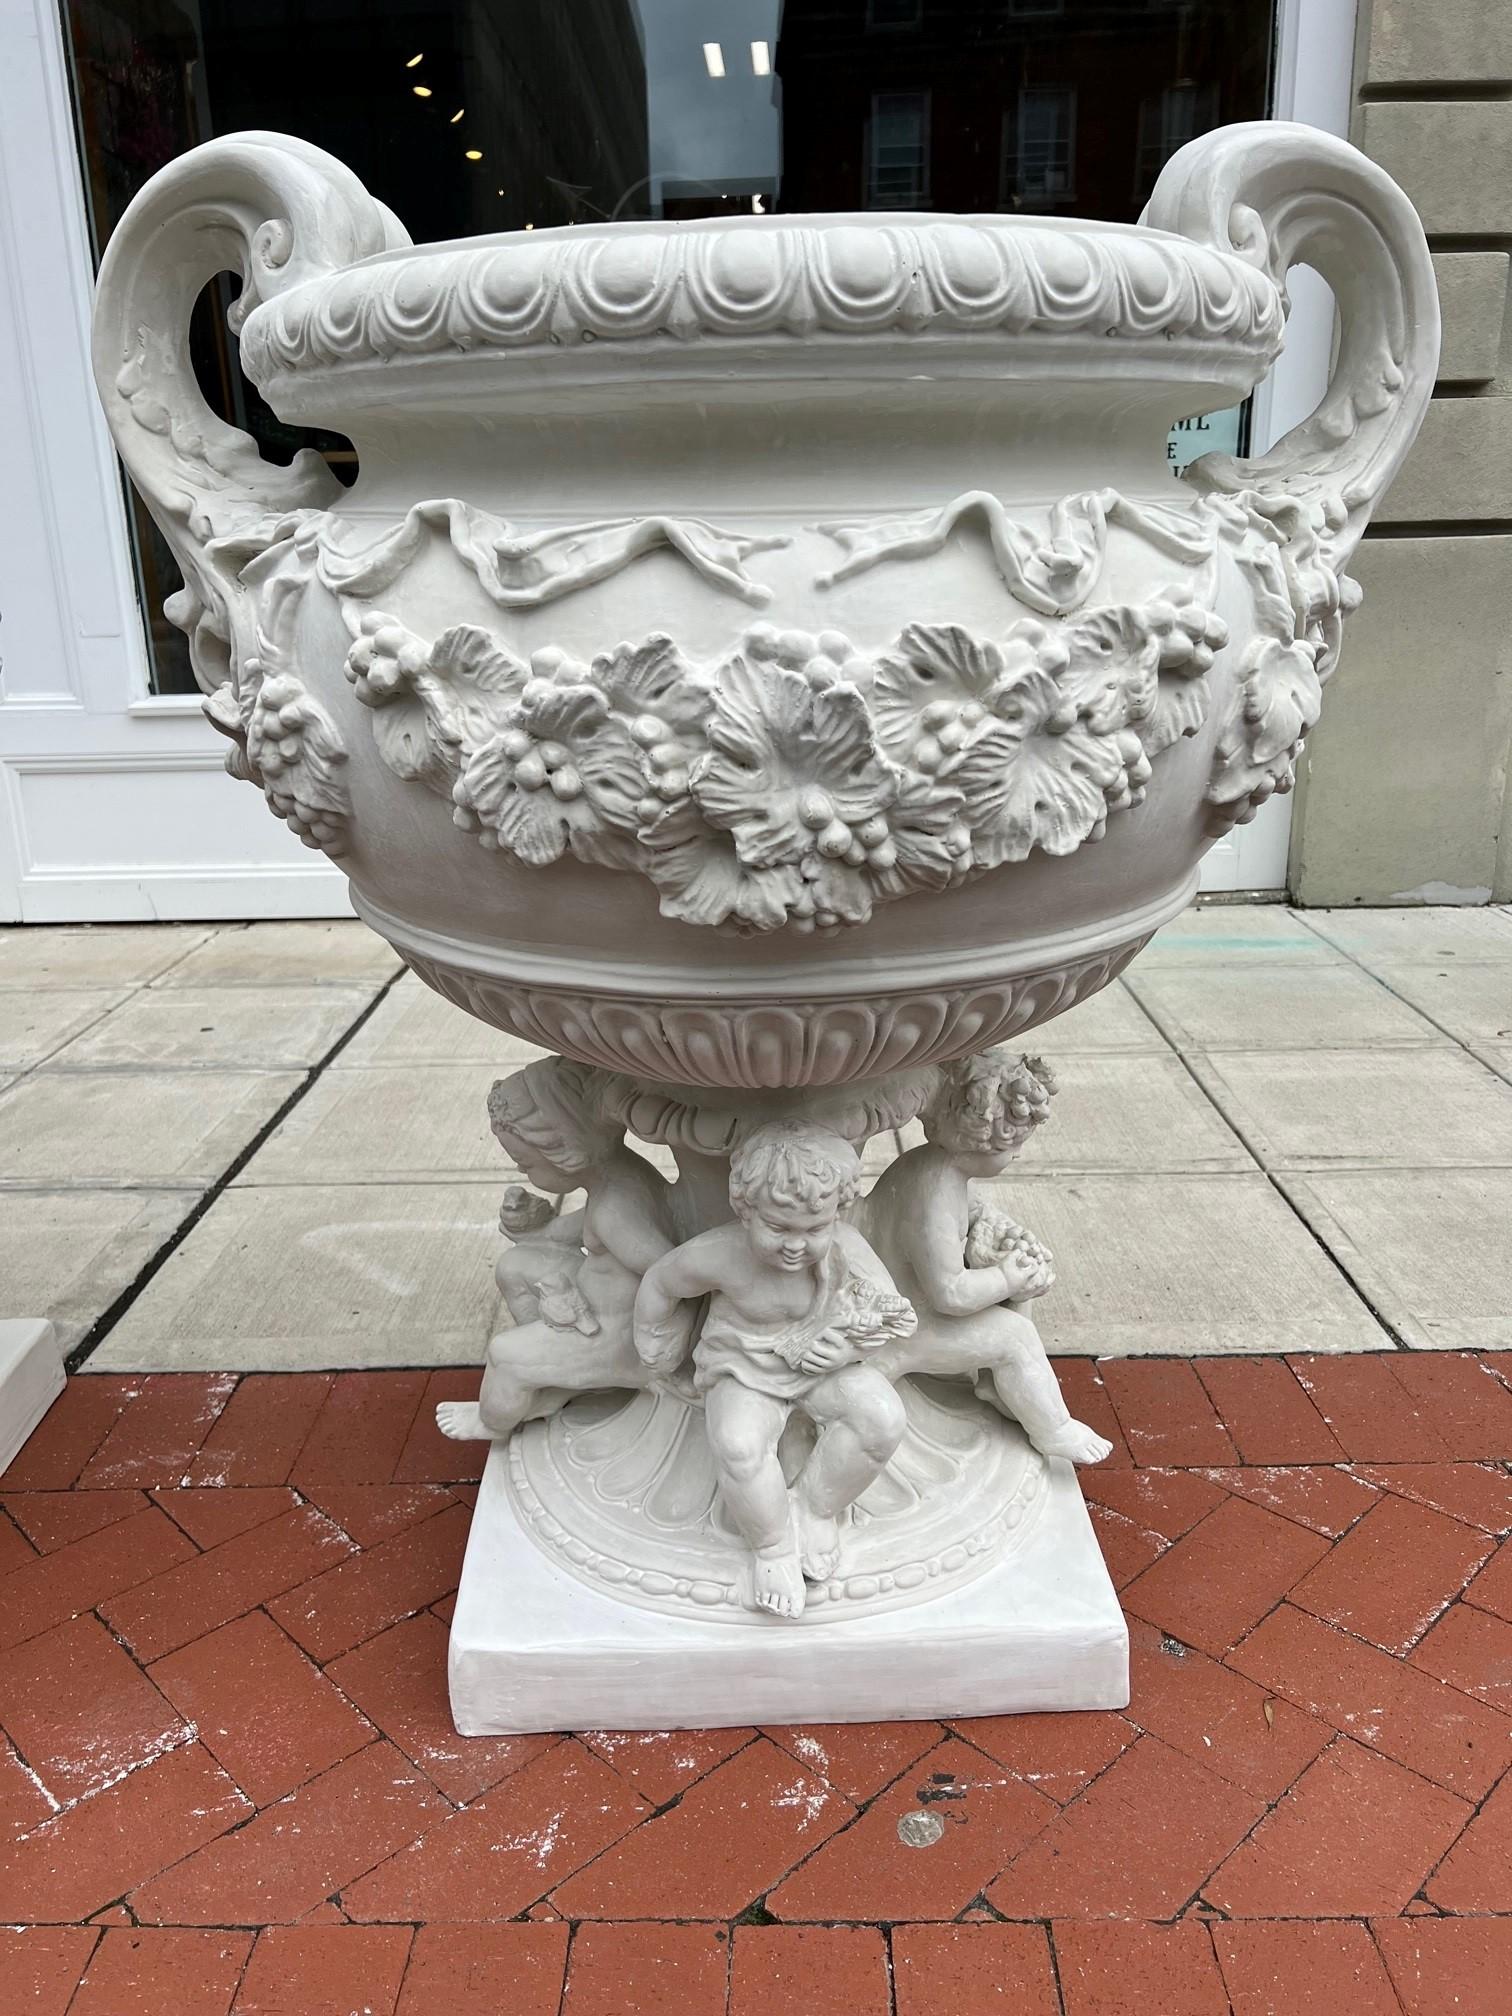 Amazing new reproduction fiberglass urn cast from a vintage glazed terracotta urn from Italy circa 1960s. Embossed with swags of vine leaves, acanthus, grapes with foliage and two monumental handles. Four cherubs sitting around the pedestal holding